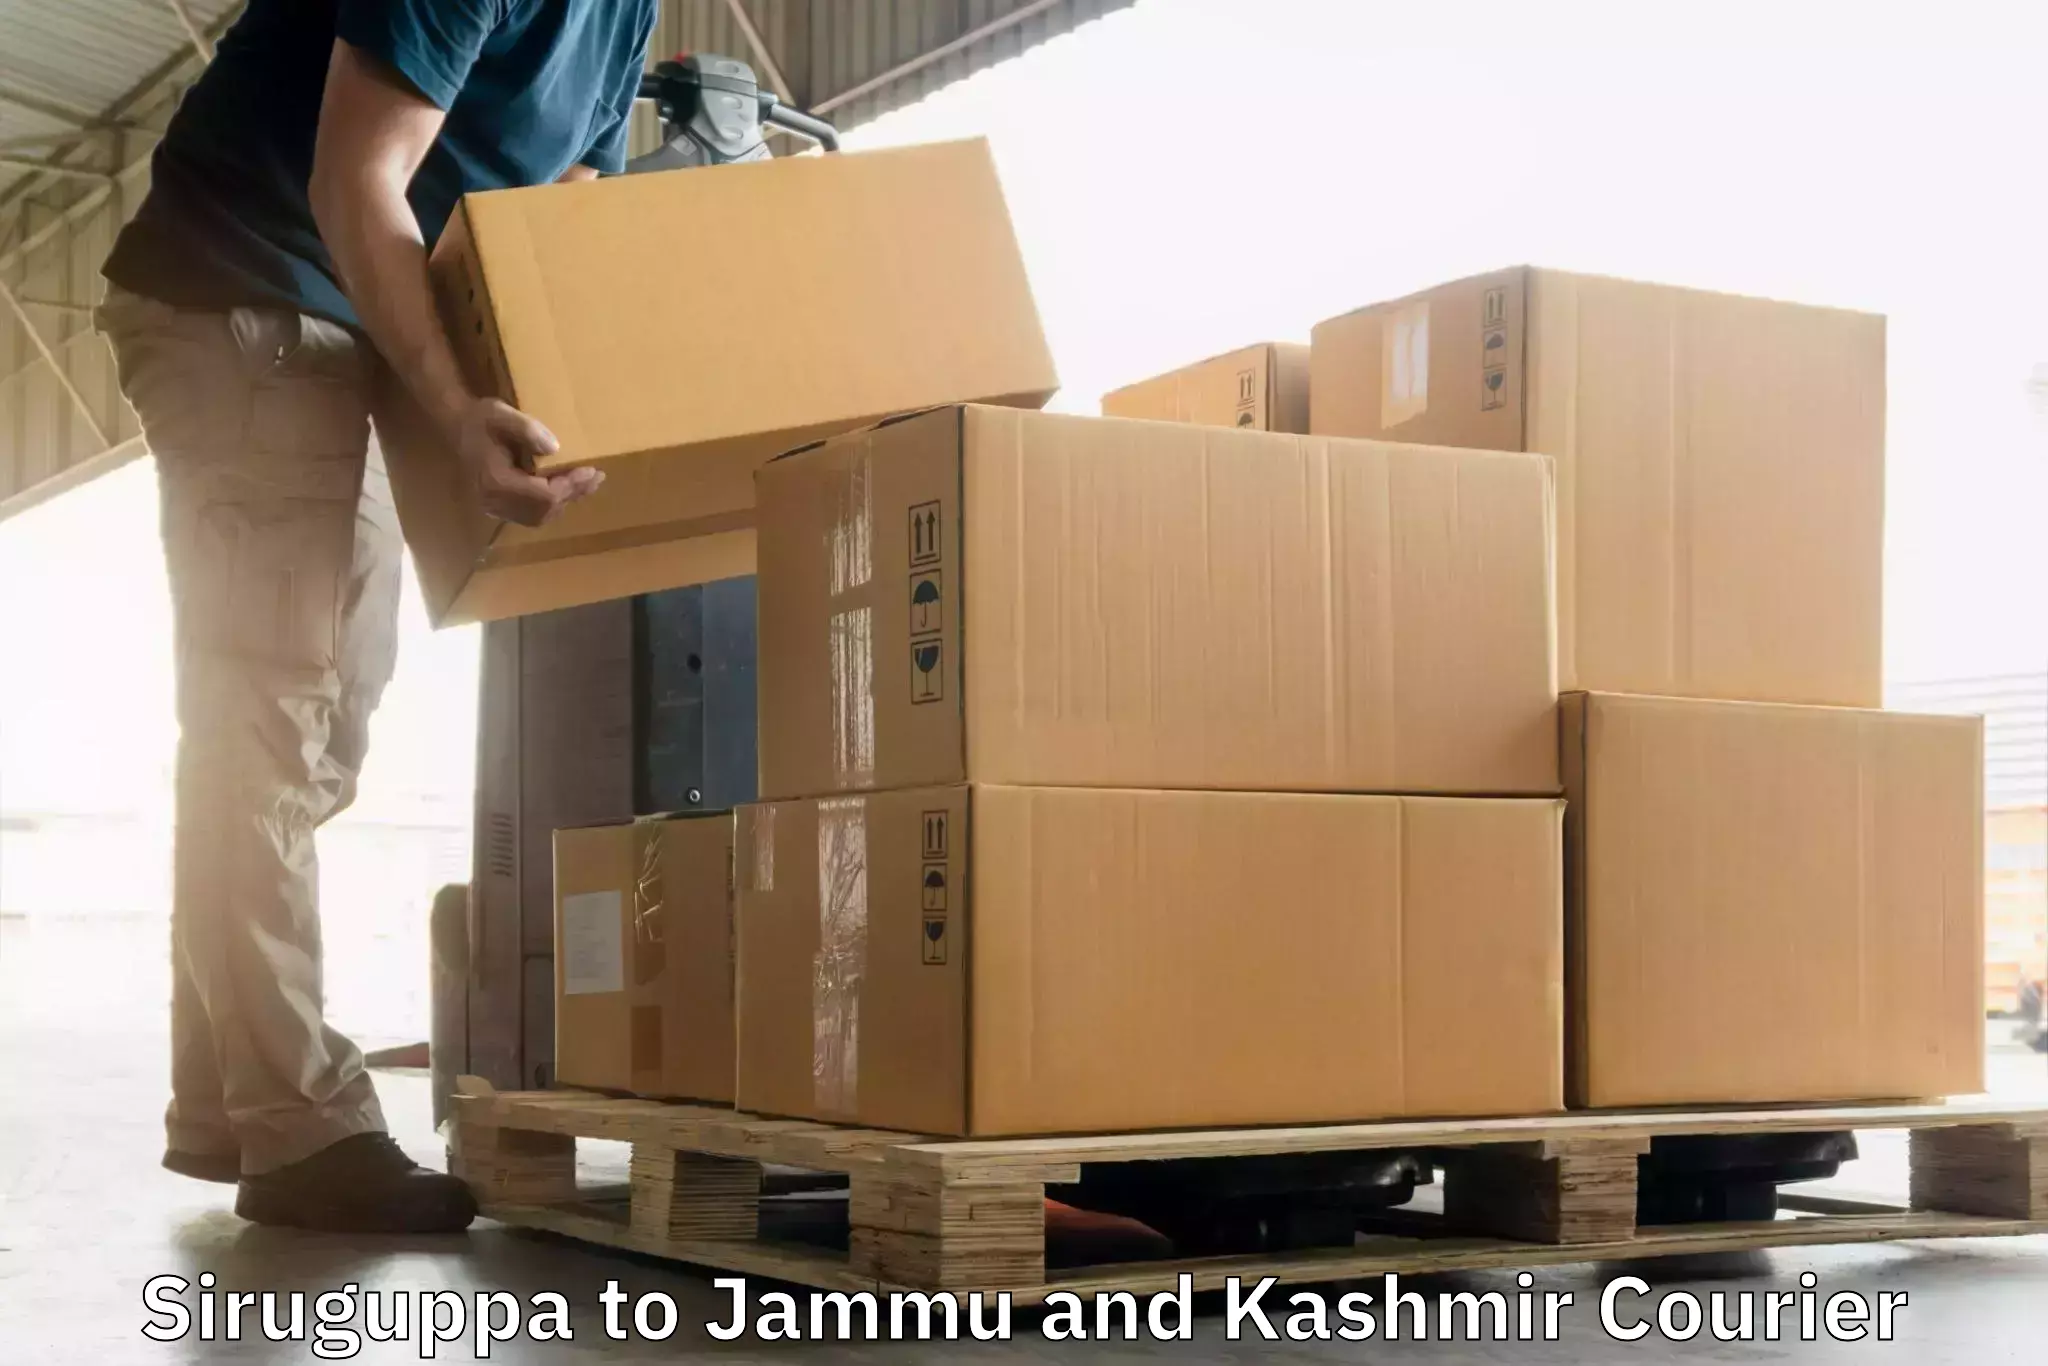 Efficient order fulfillment in Siruguppa to Poonch